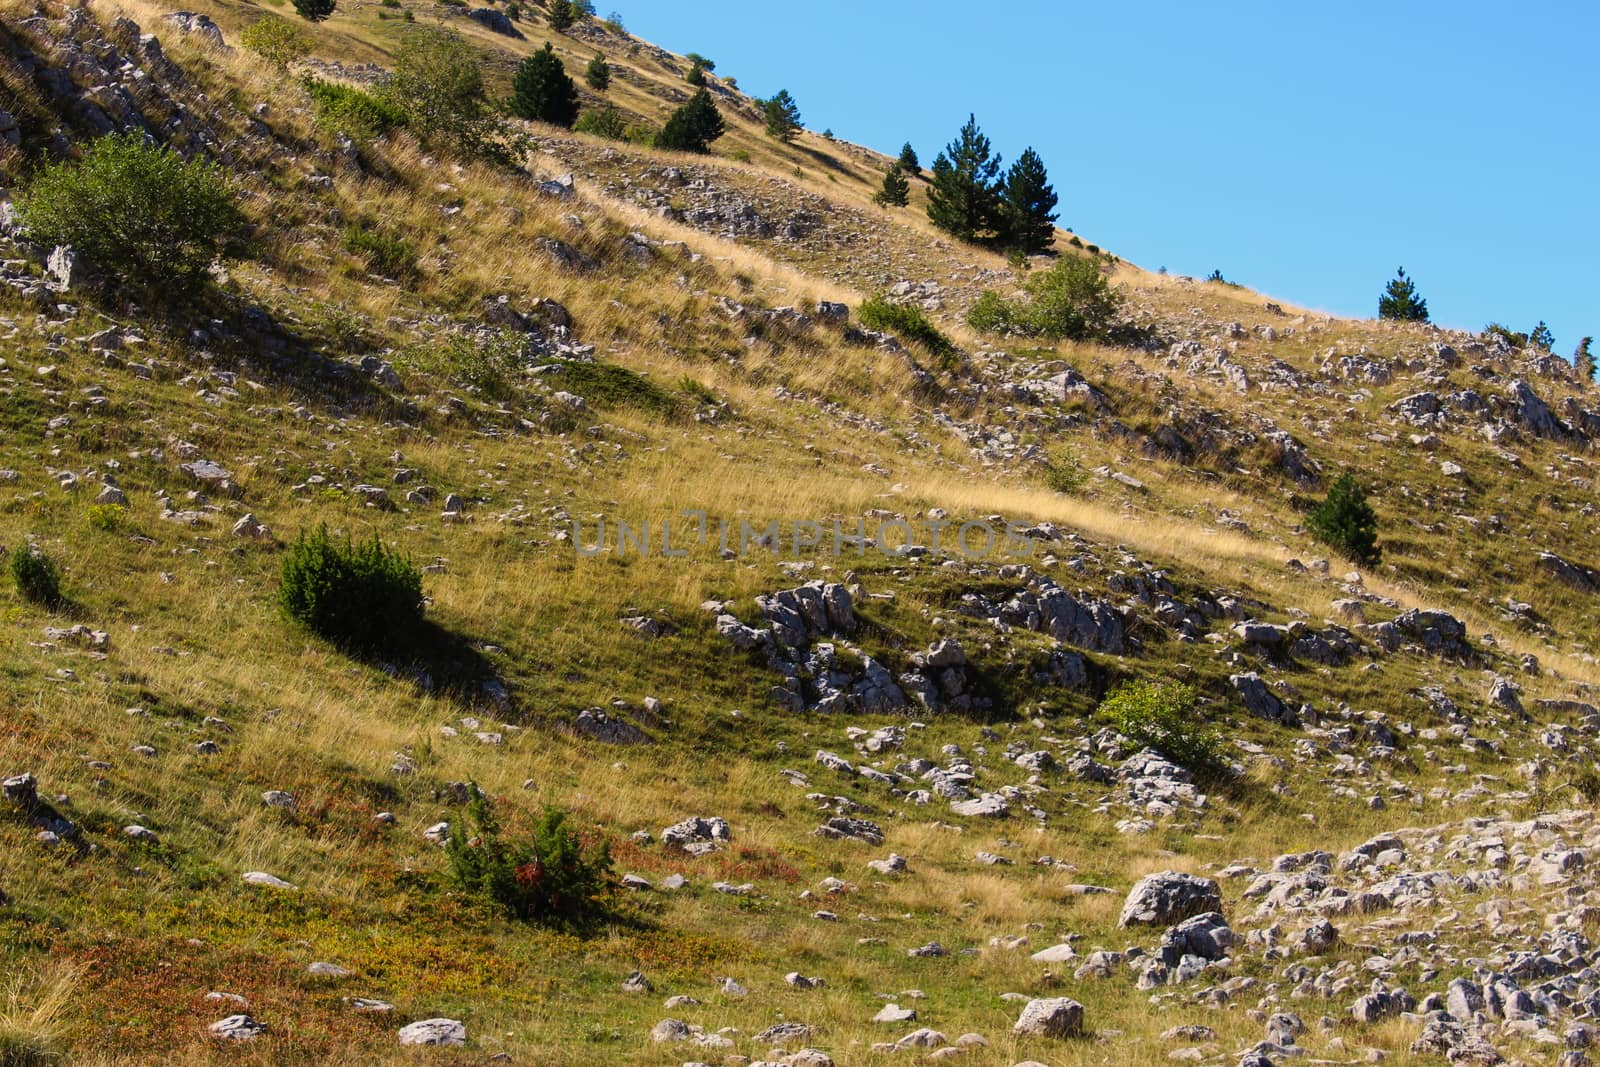 Nature, meadow, rocky, bushes, trees. On the mountain Bjelasnica, Bosnia and Herzegovina.